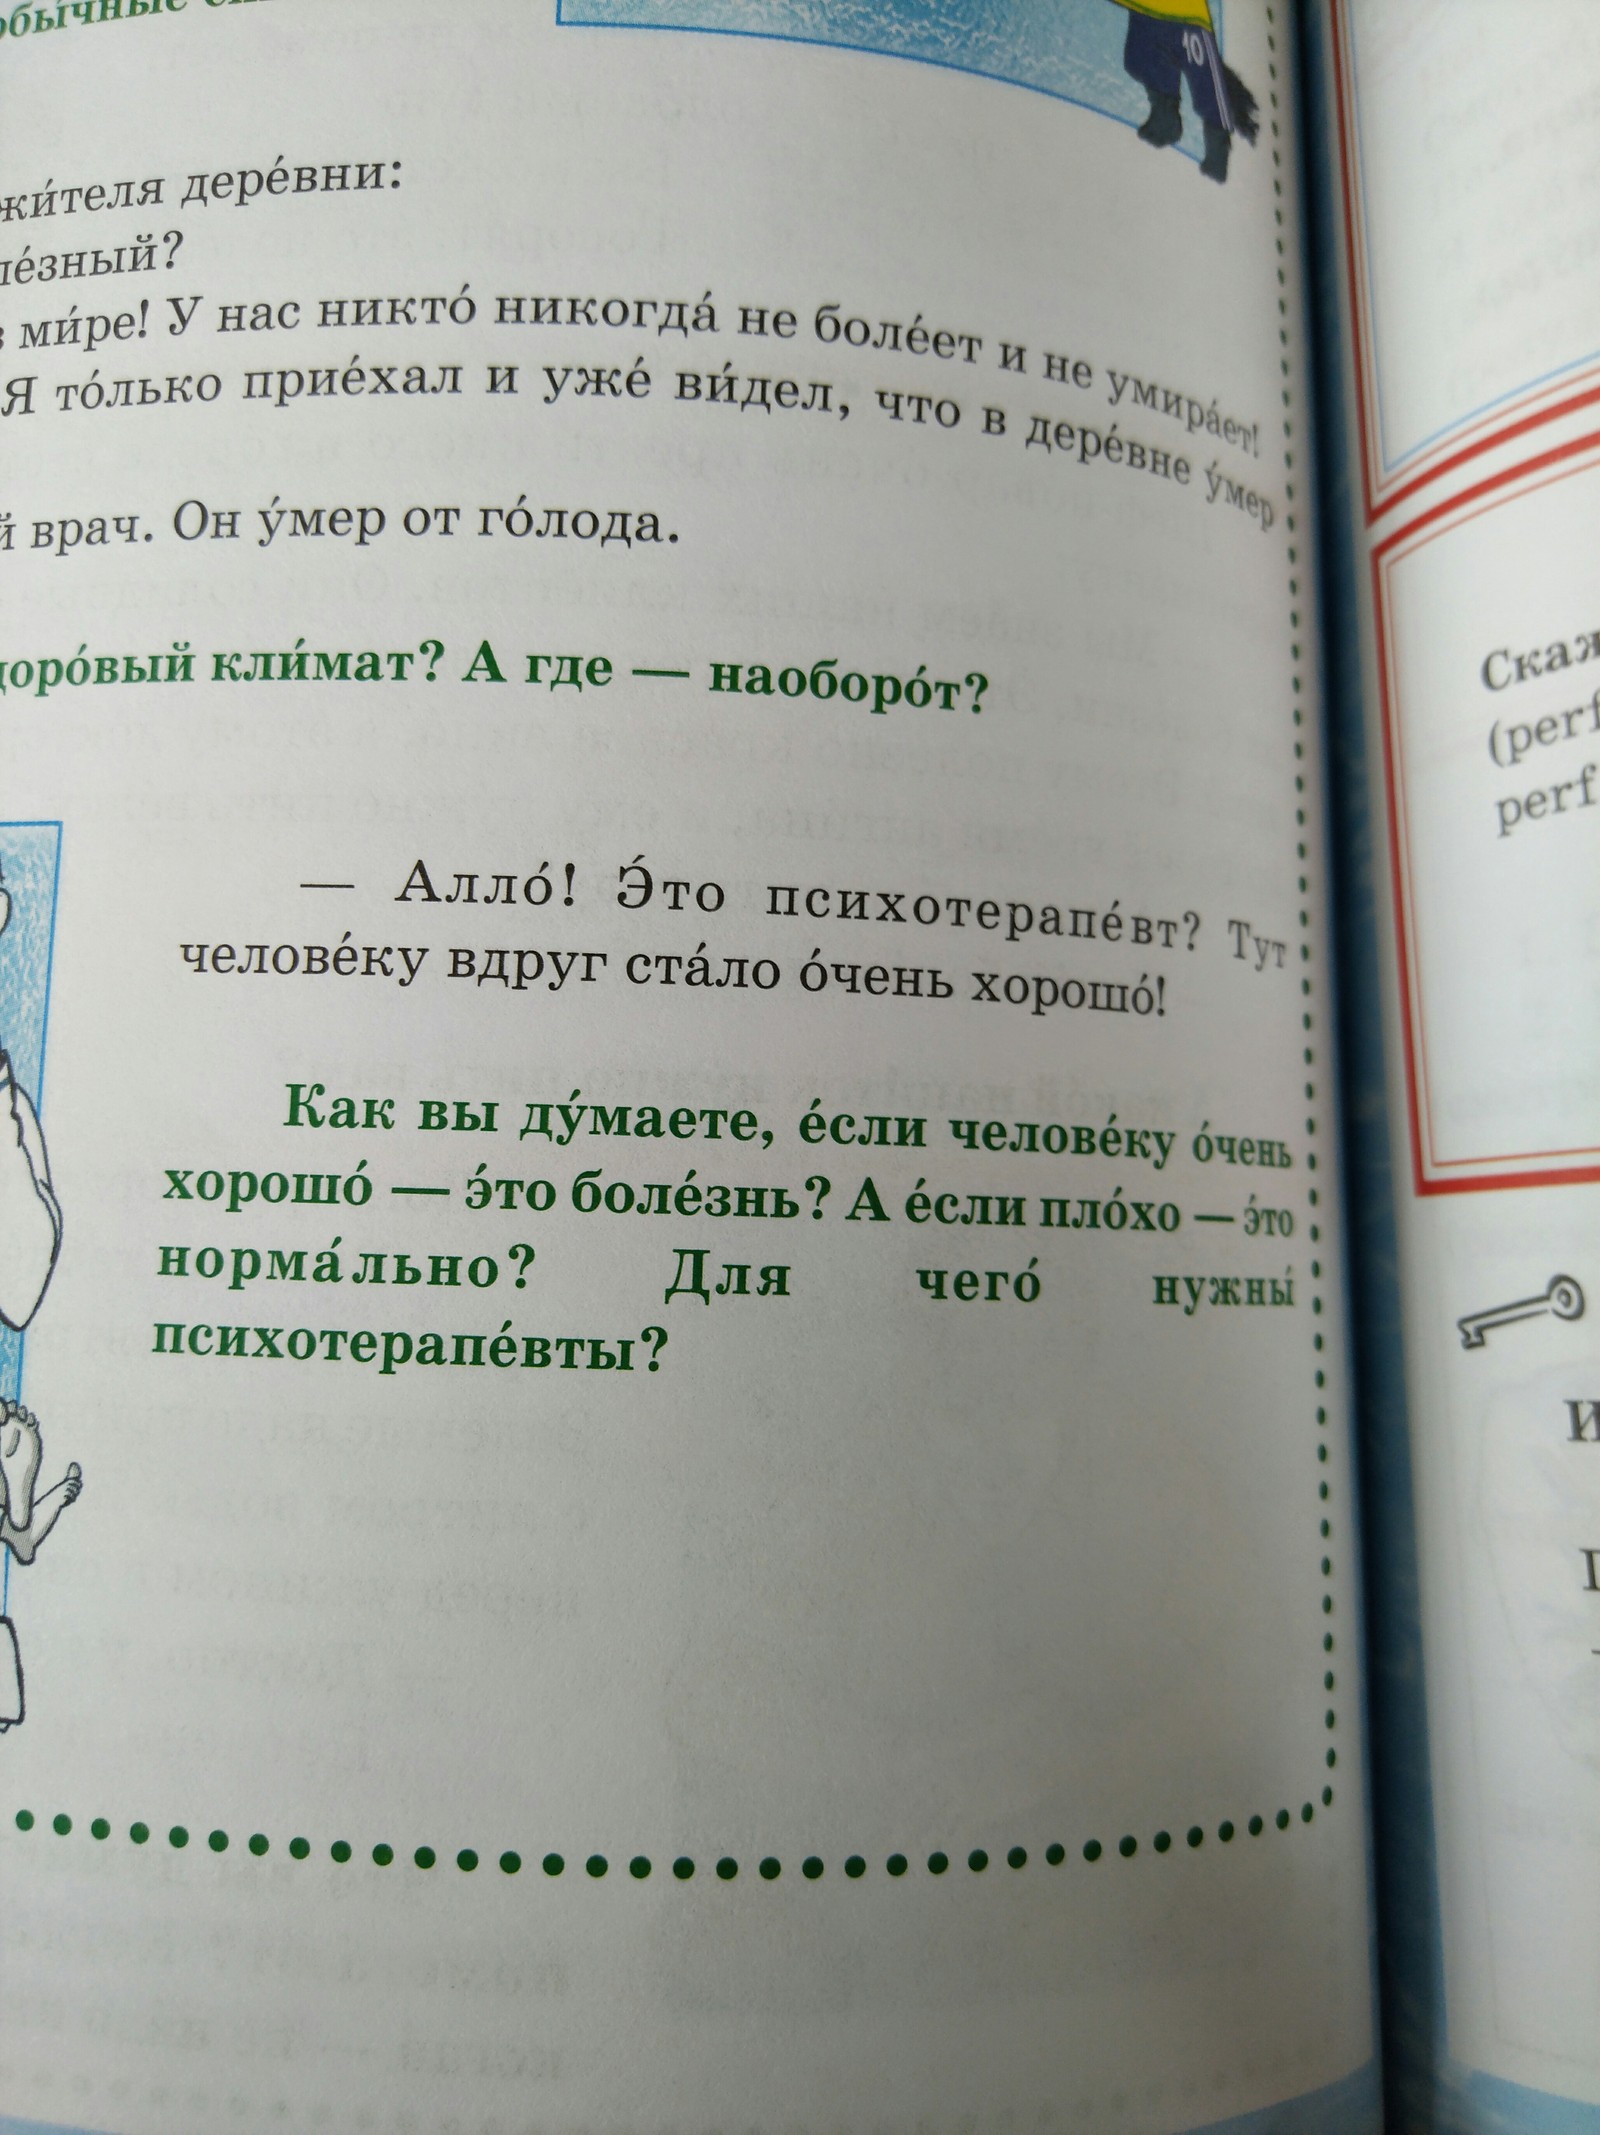 Russian for foreigners - My, Russian language, Textbook, Education, Longpost